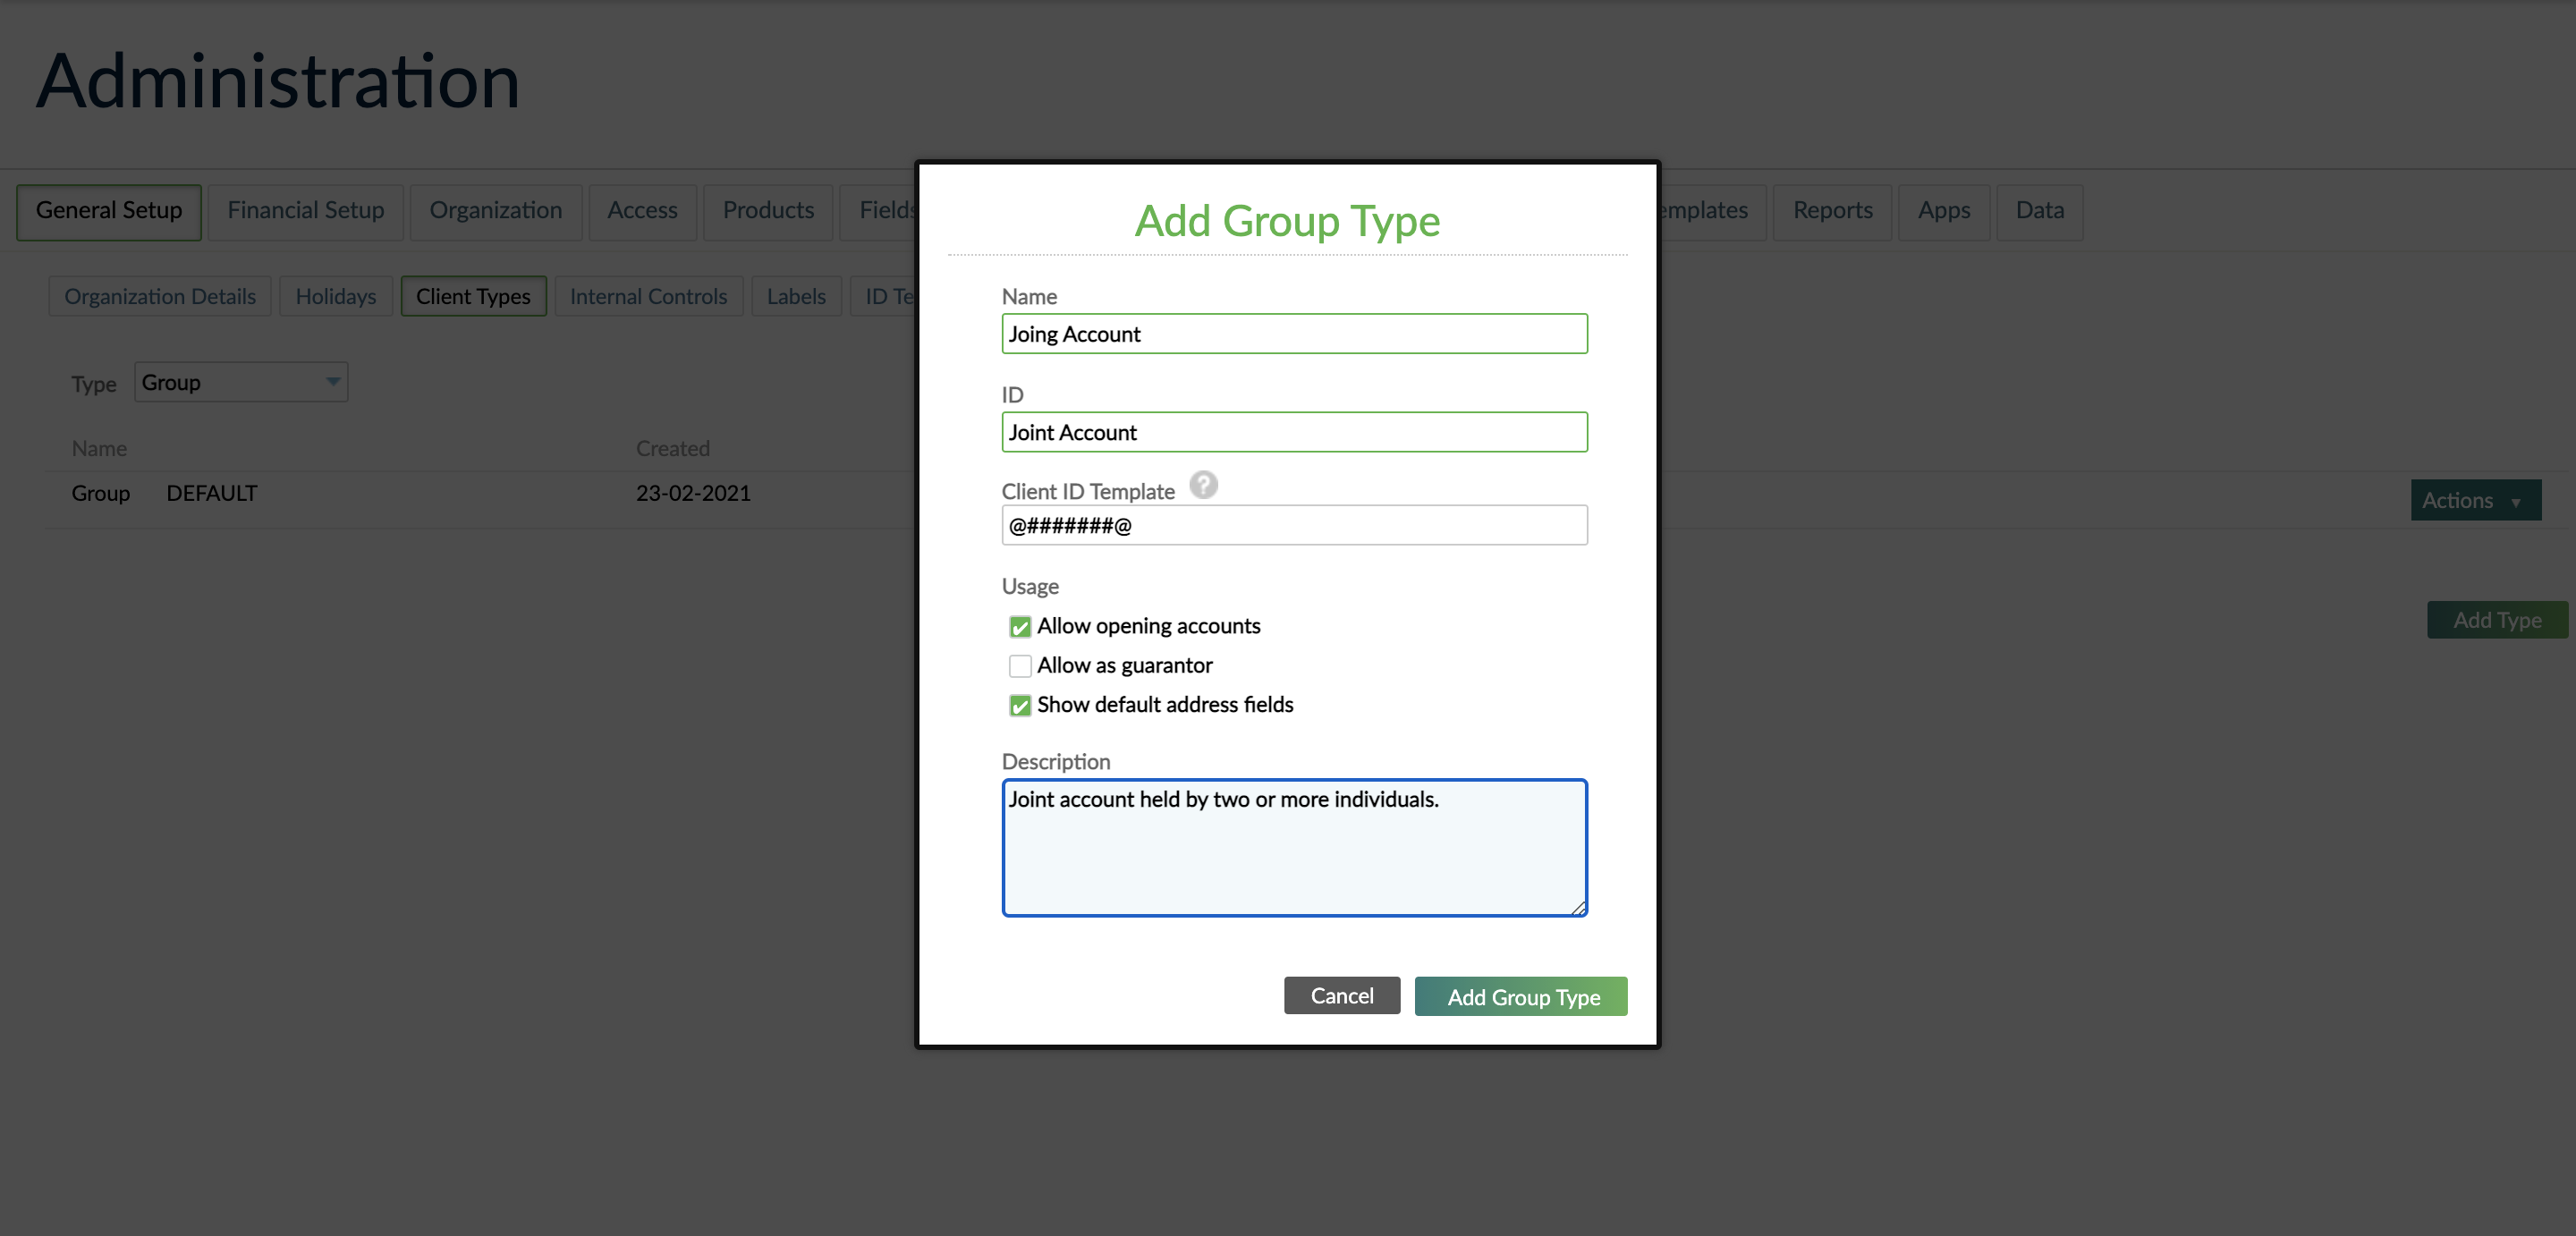 Add Group Type dialog creating Joint Account group type